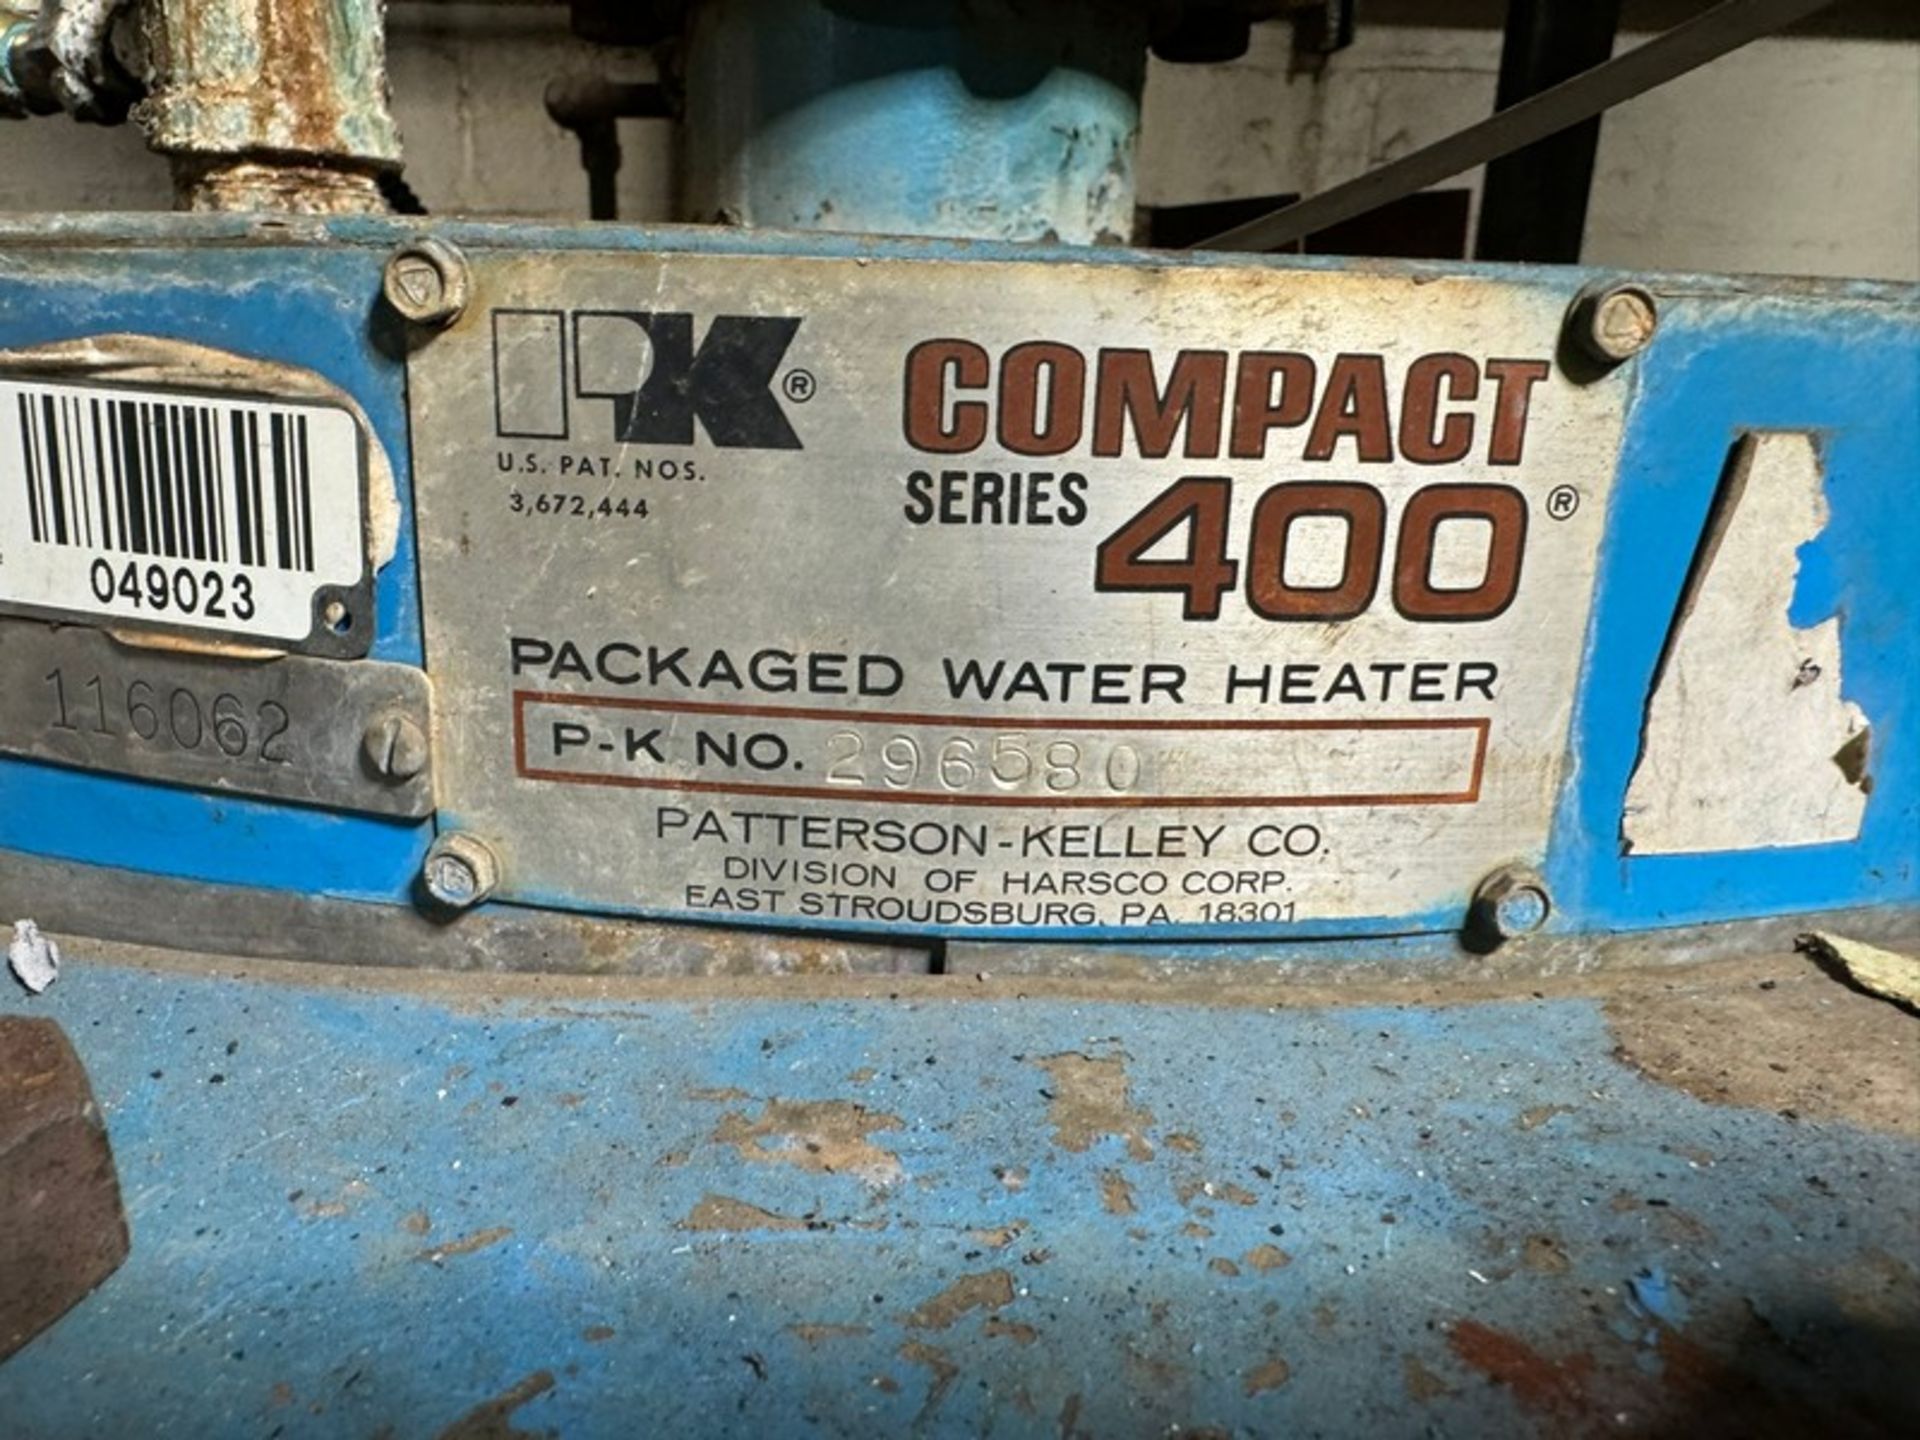 Patterson-Kelley Packaged Water Heater, PK. No. 296580, Compact Series 400 (N: 049023)(LOCATED IN - Bild 3 aus 3